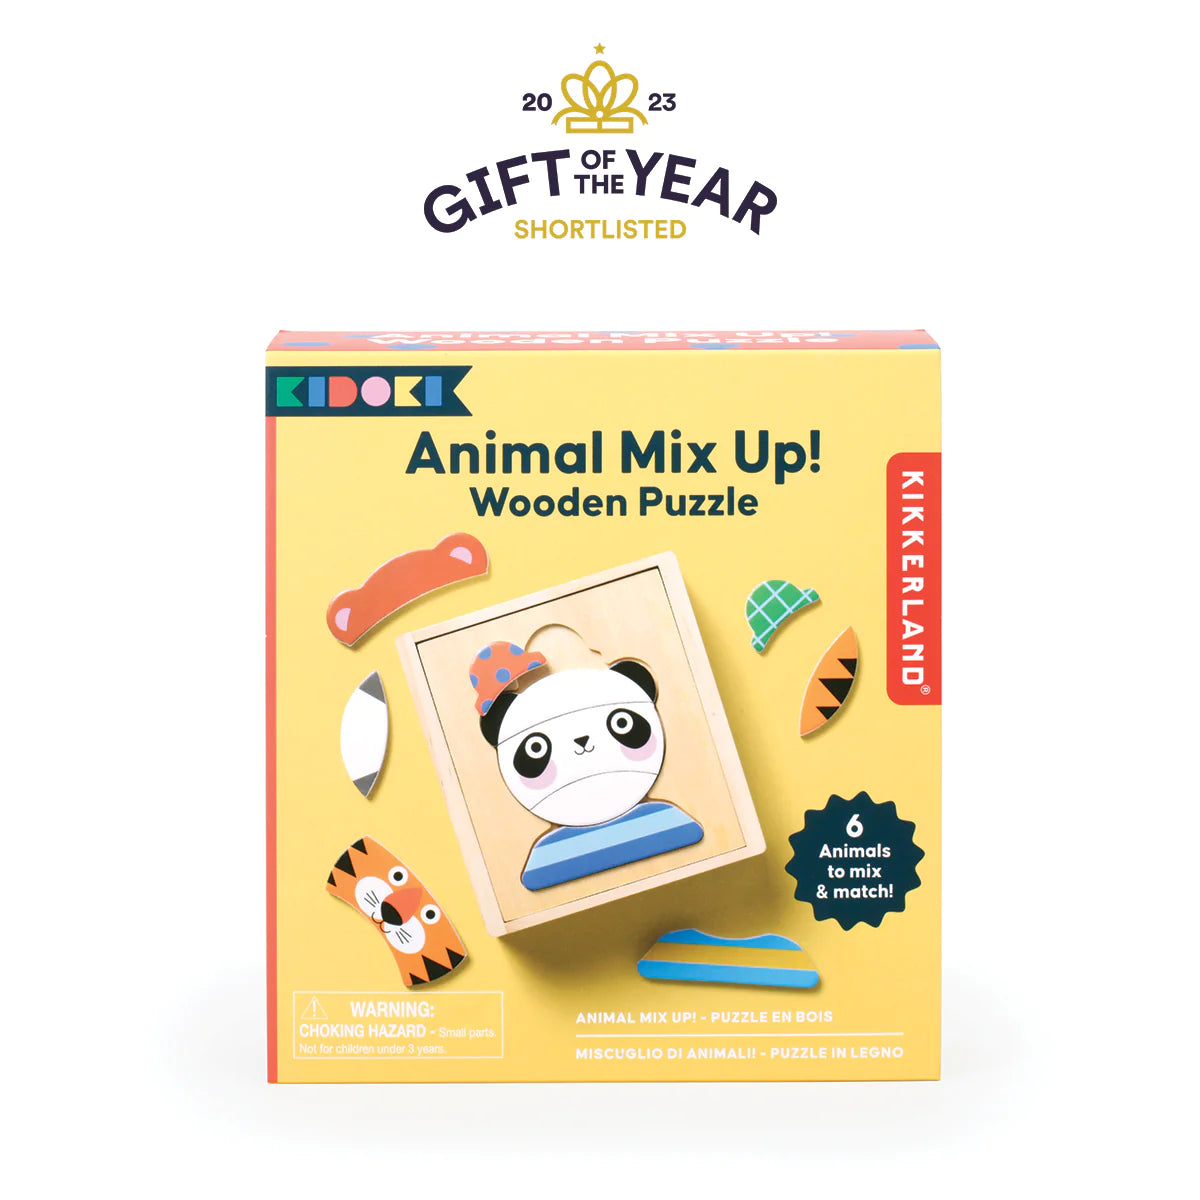 Animal Mix Up! Wooden Puzzle